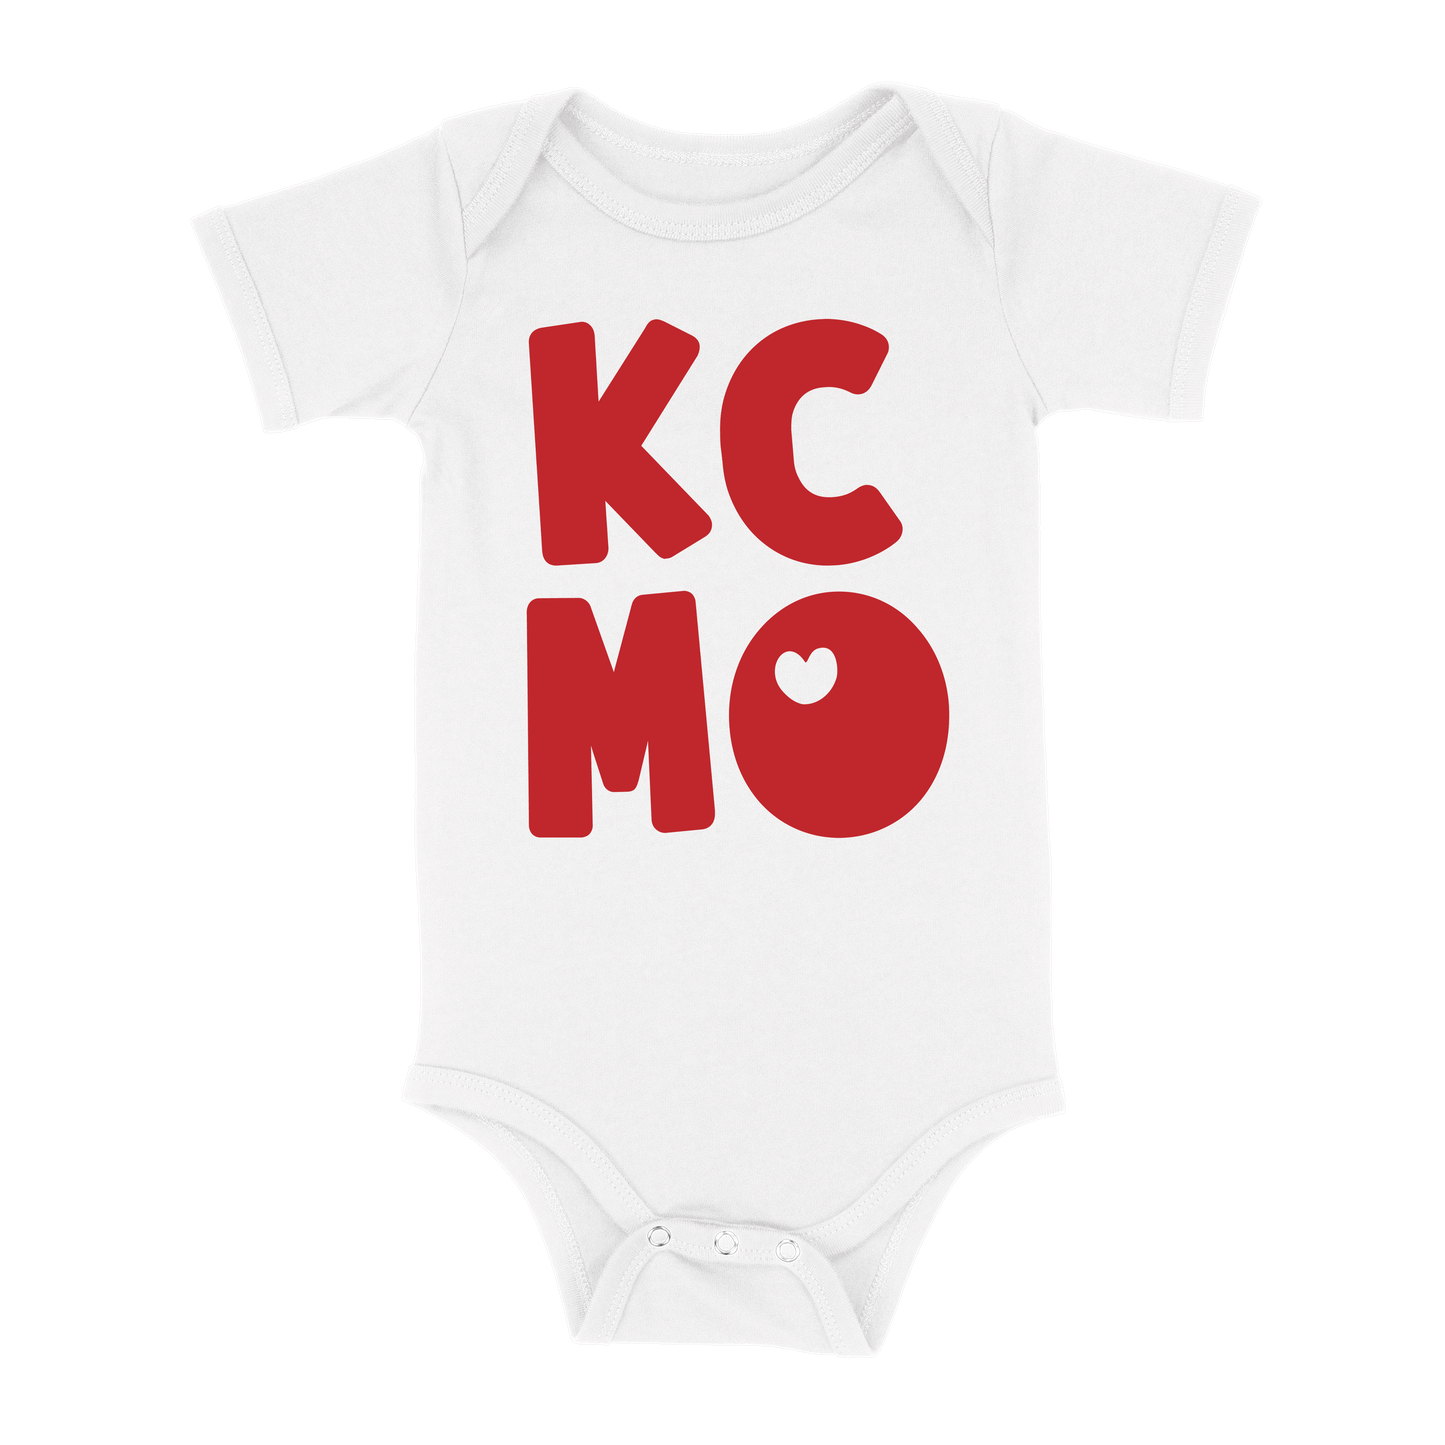 KCMO Baby One Piece | White Red